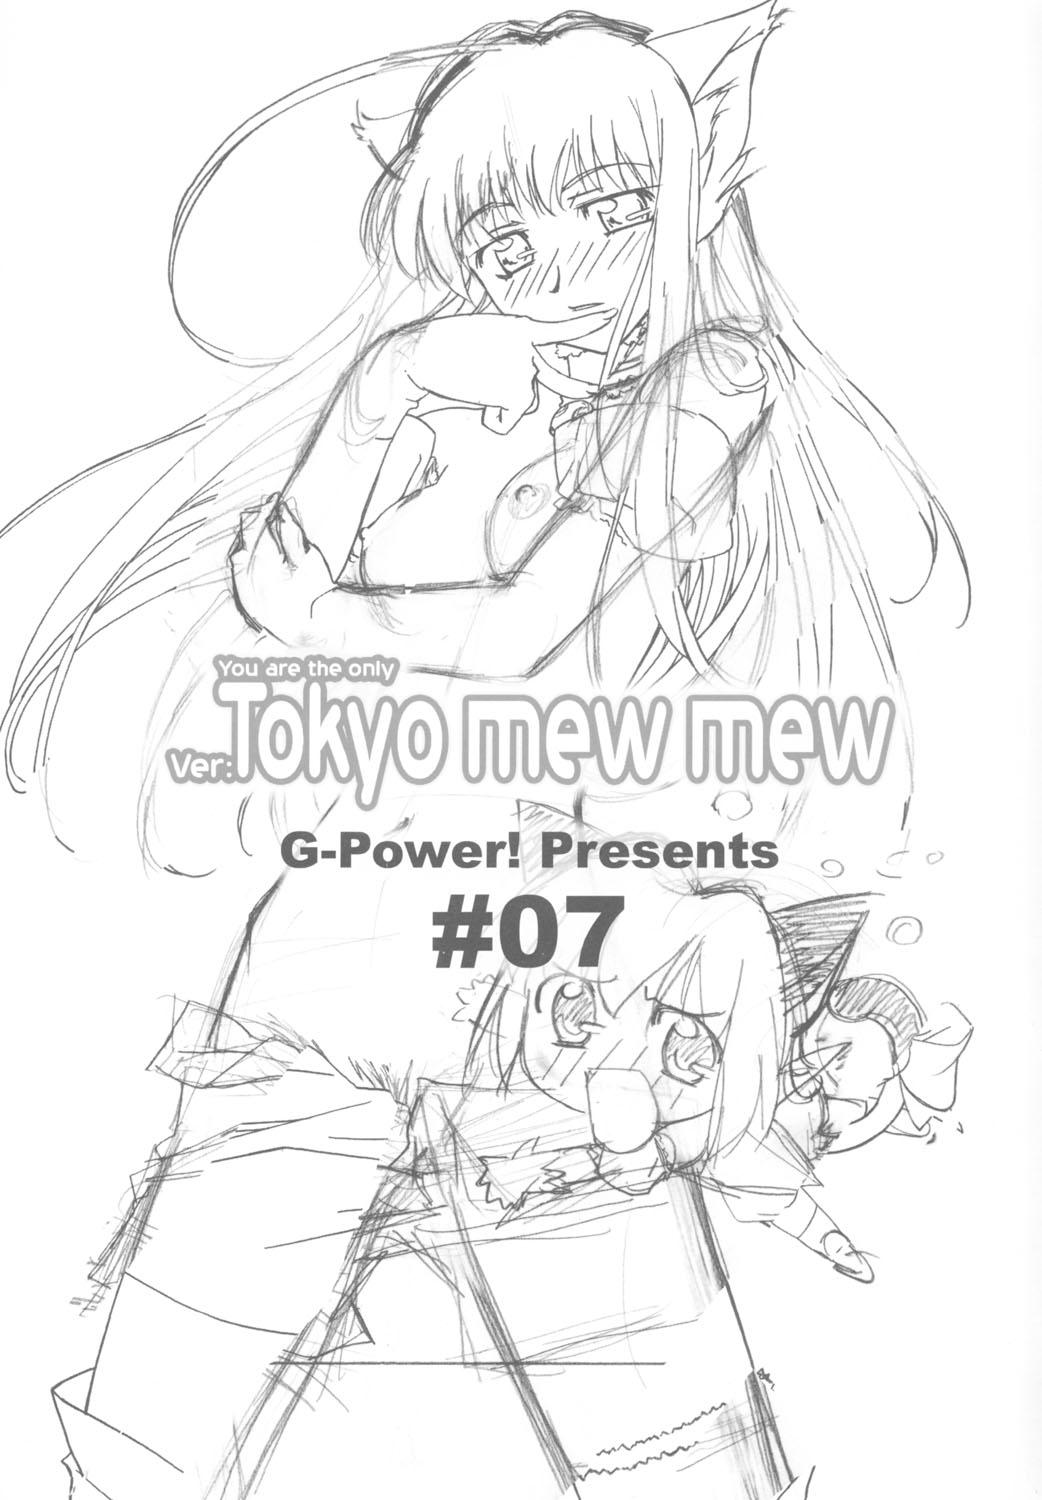 Delicia YOU ARE THE ONLY version:Tokyo mew mew - Tokyo mew mew Defloration - Page 2